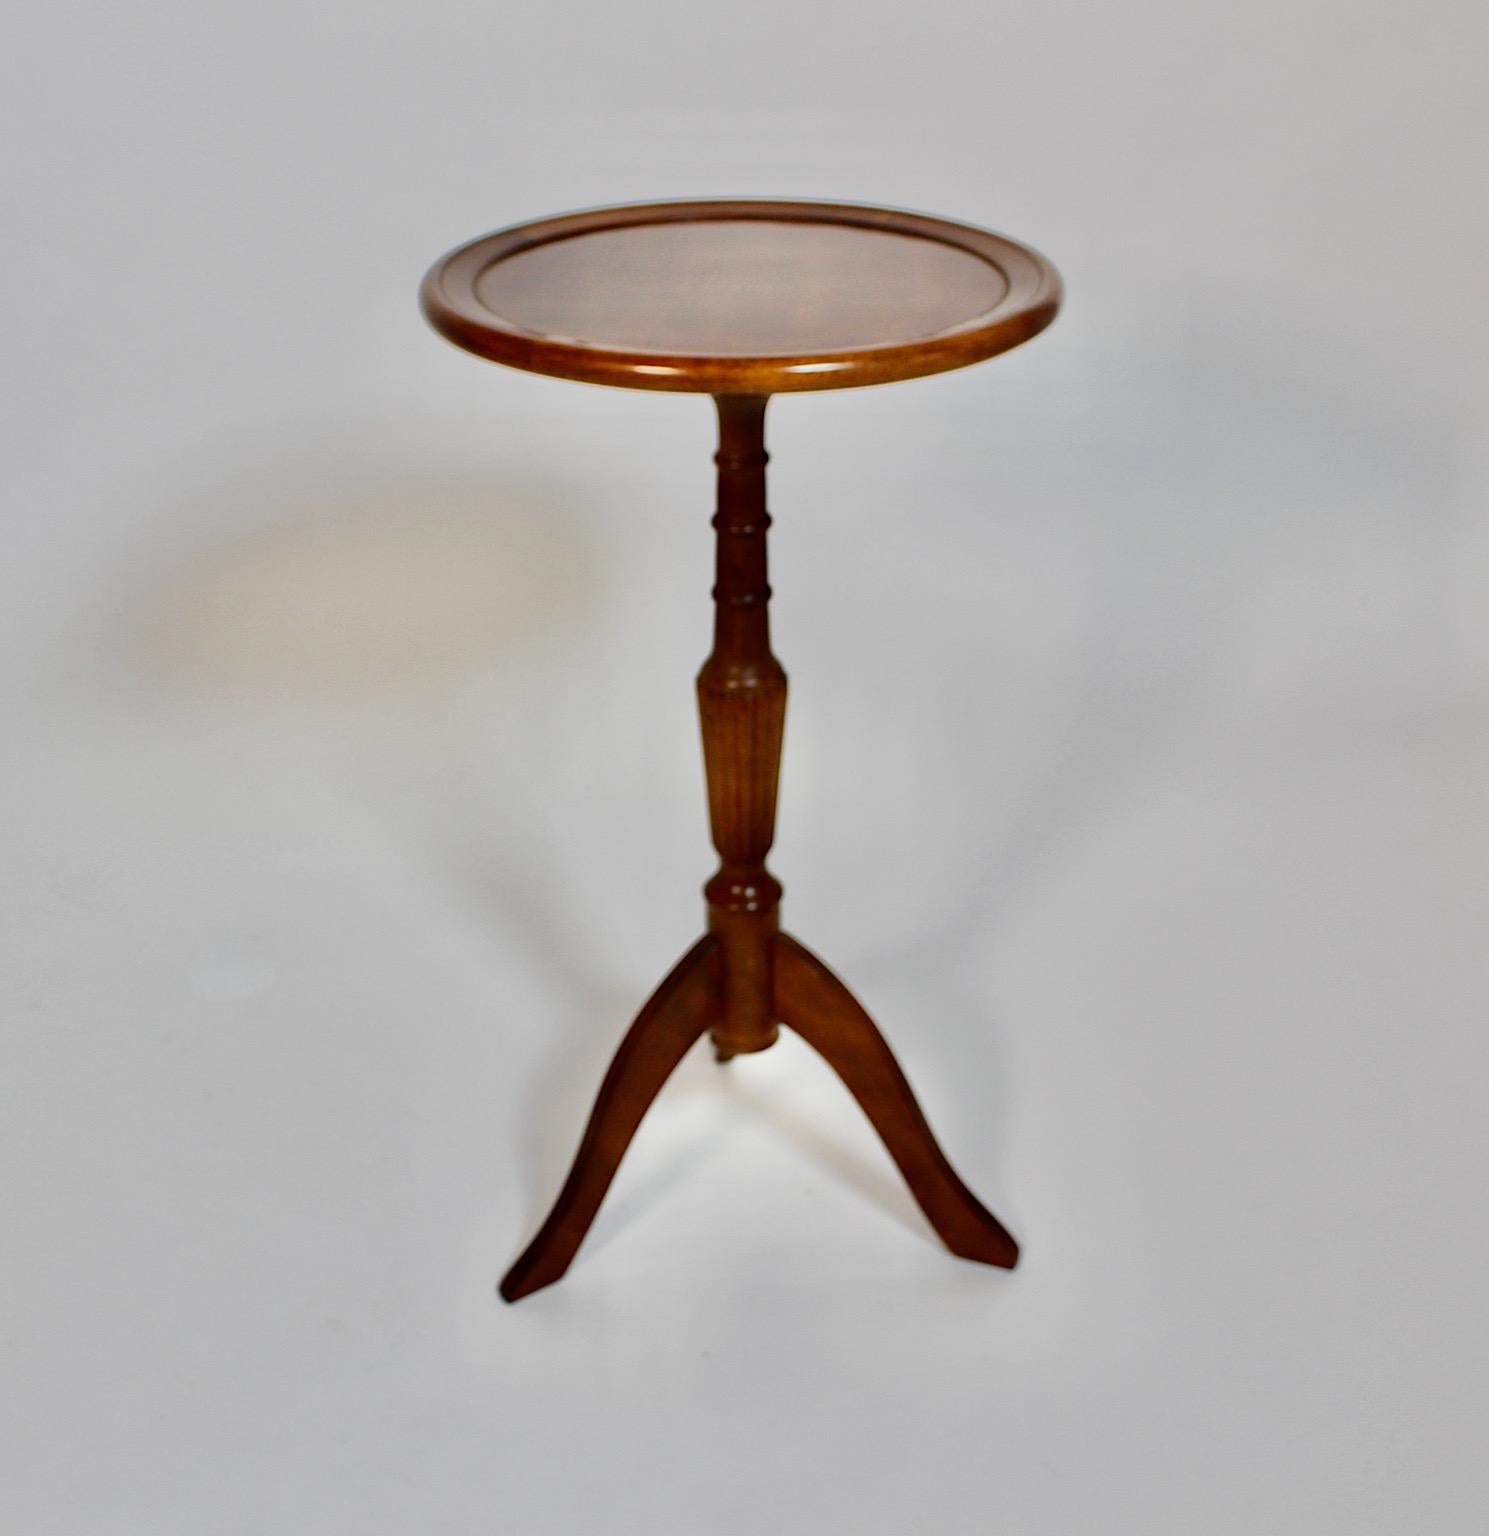 Shaker Modern Vintage Walnut Circular Side Table Turned Legs Italy 1970s For Sale